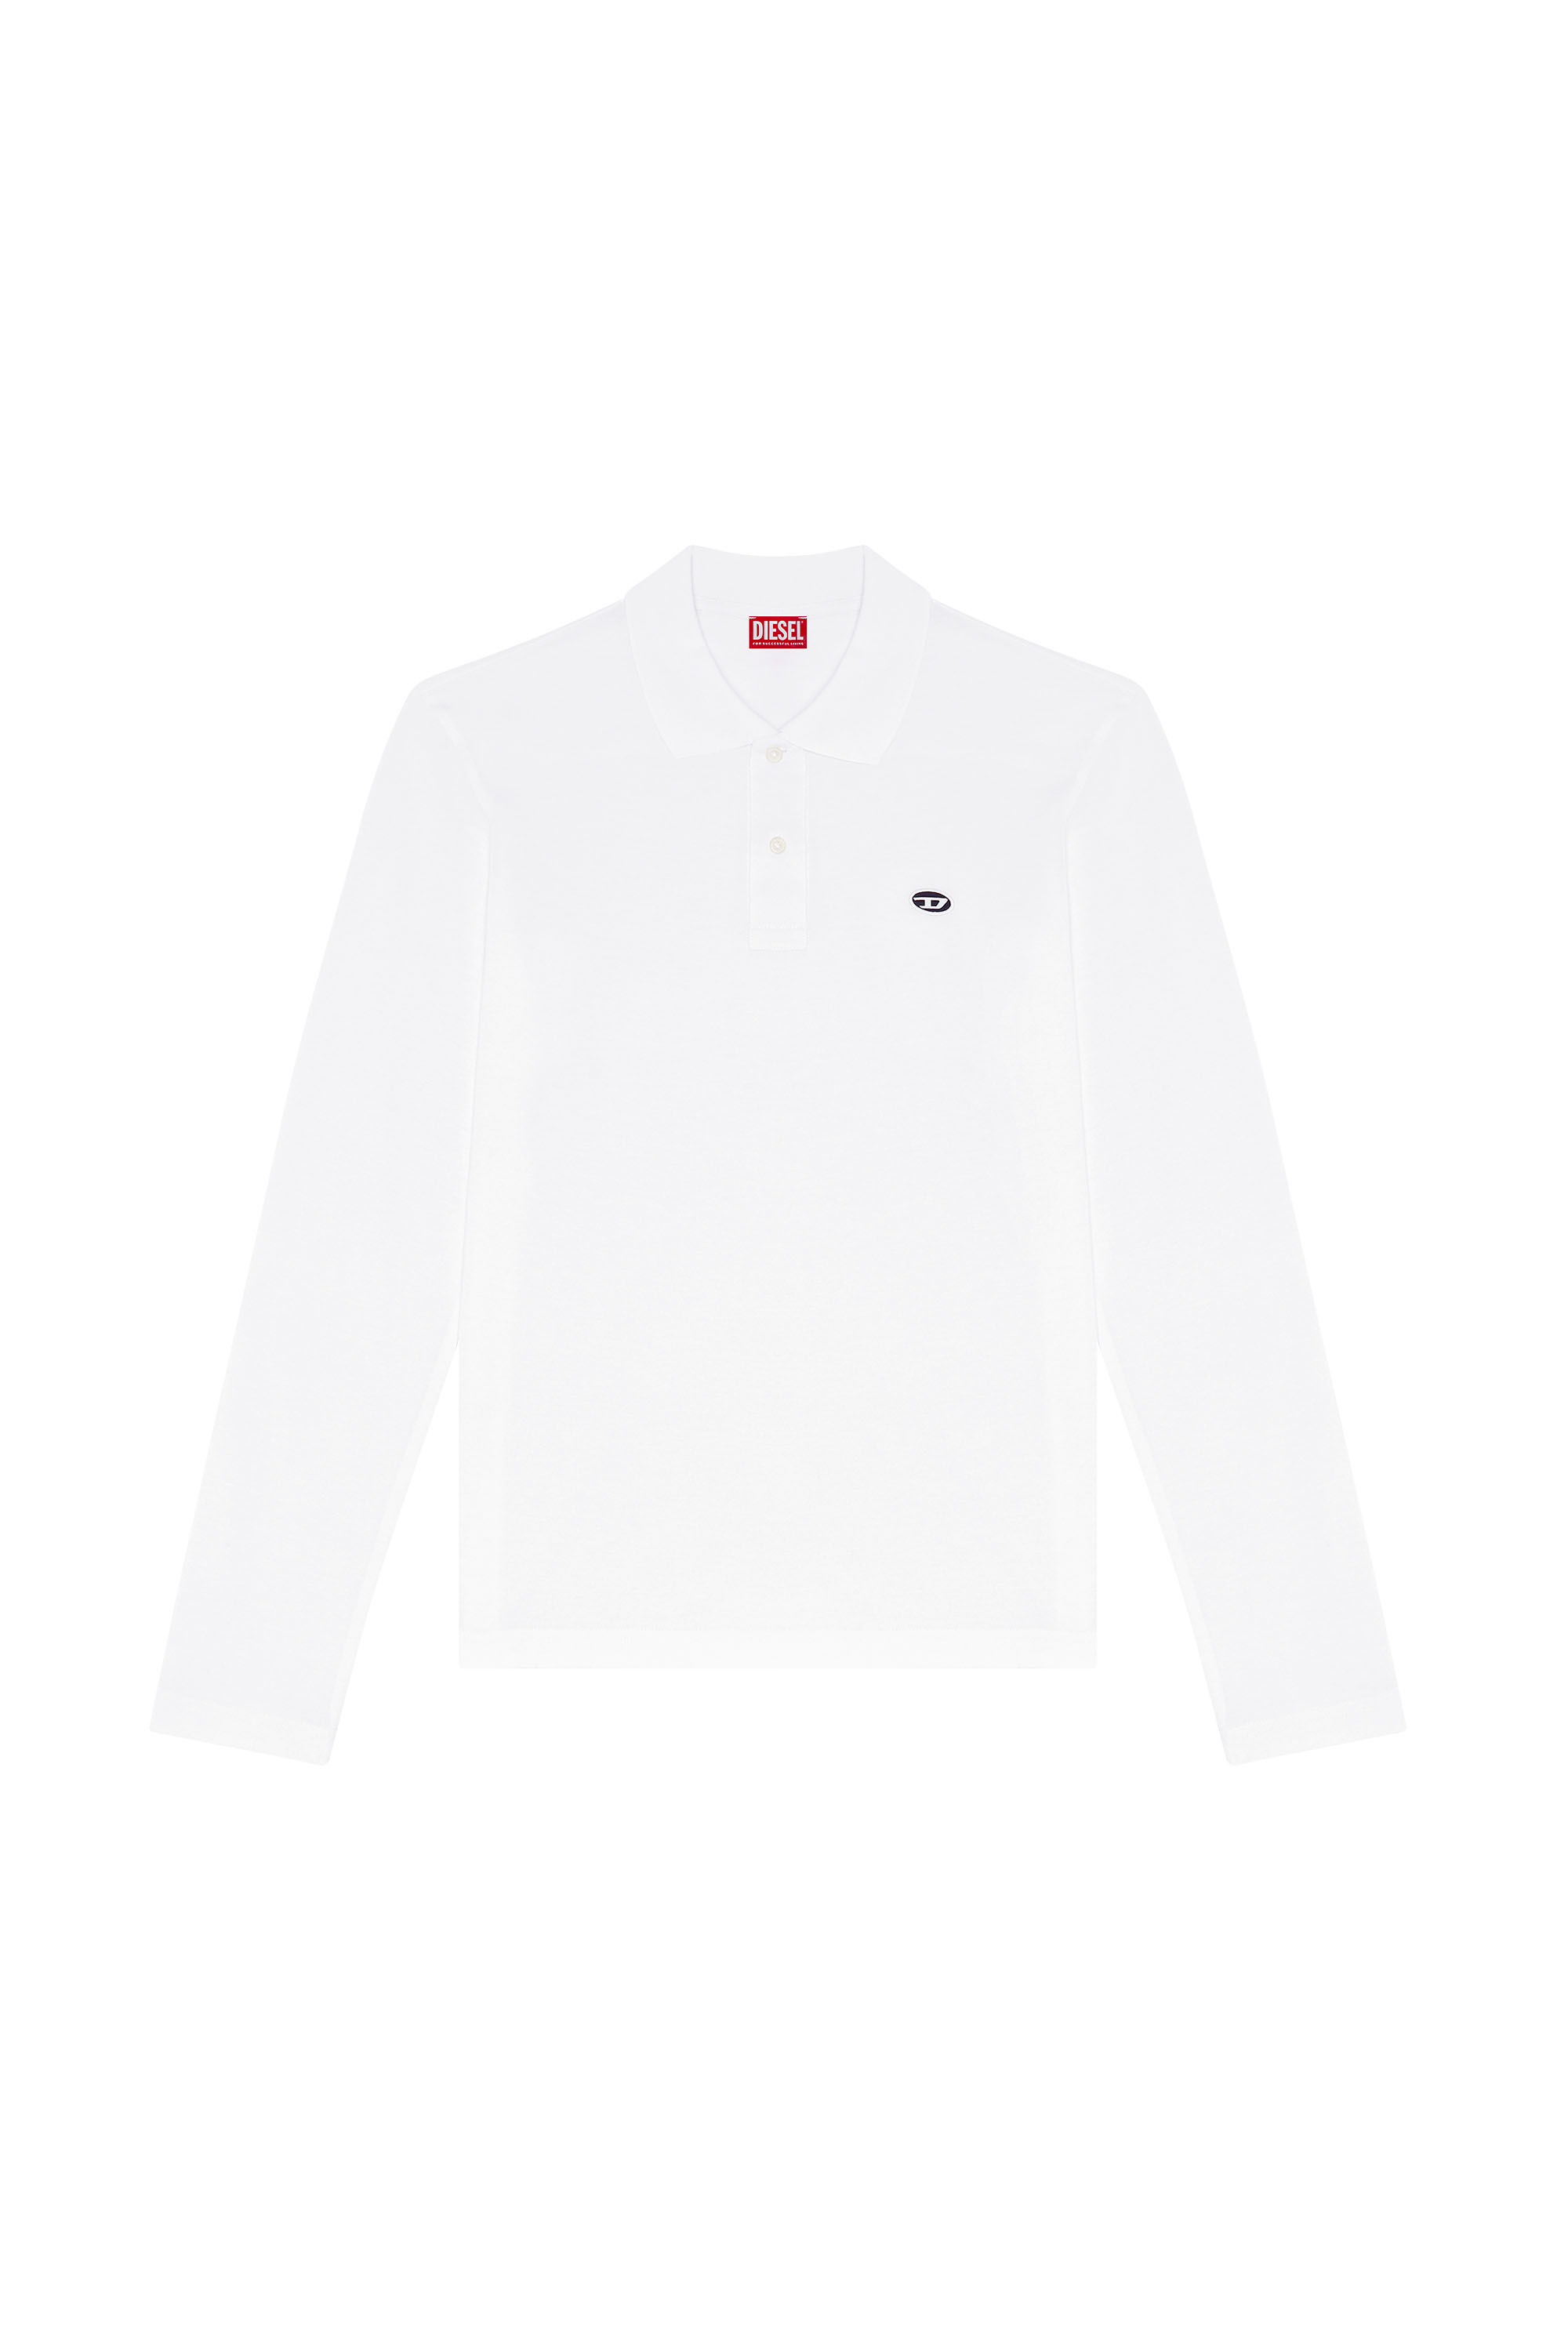 T-SMITH-LS-DOVAL-PJ Man: Long-sleeve polo shirt | Diesel